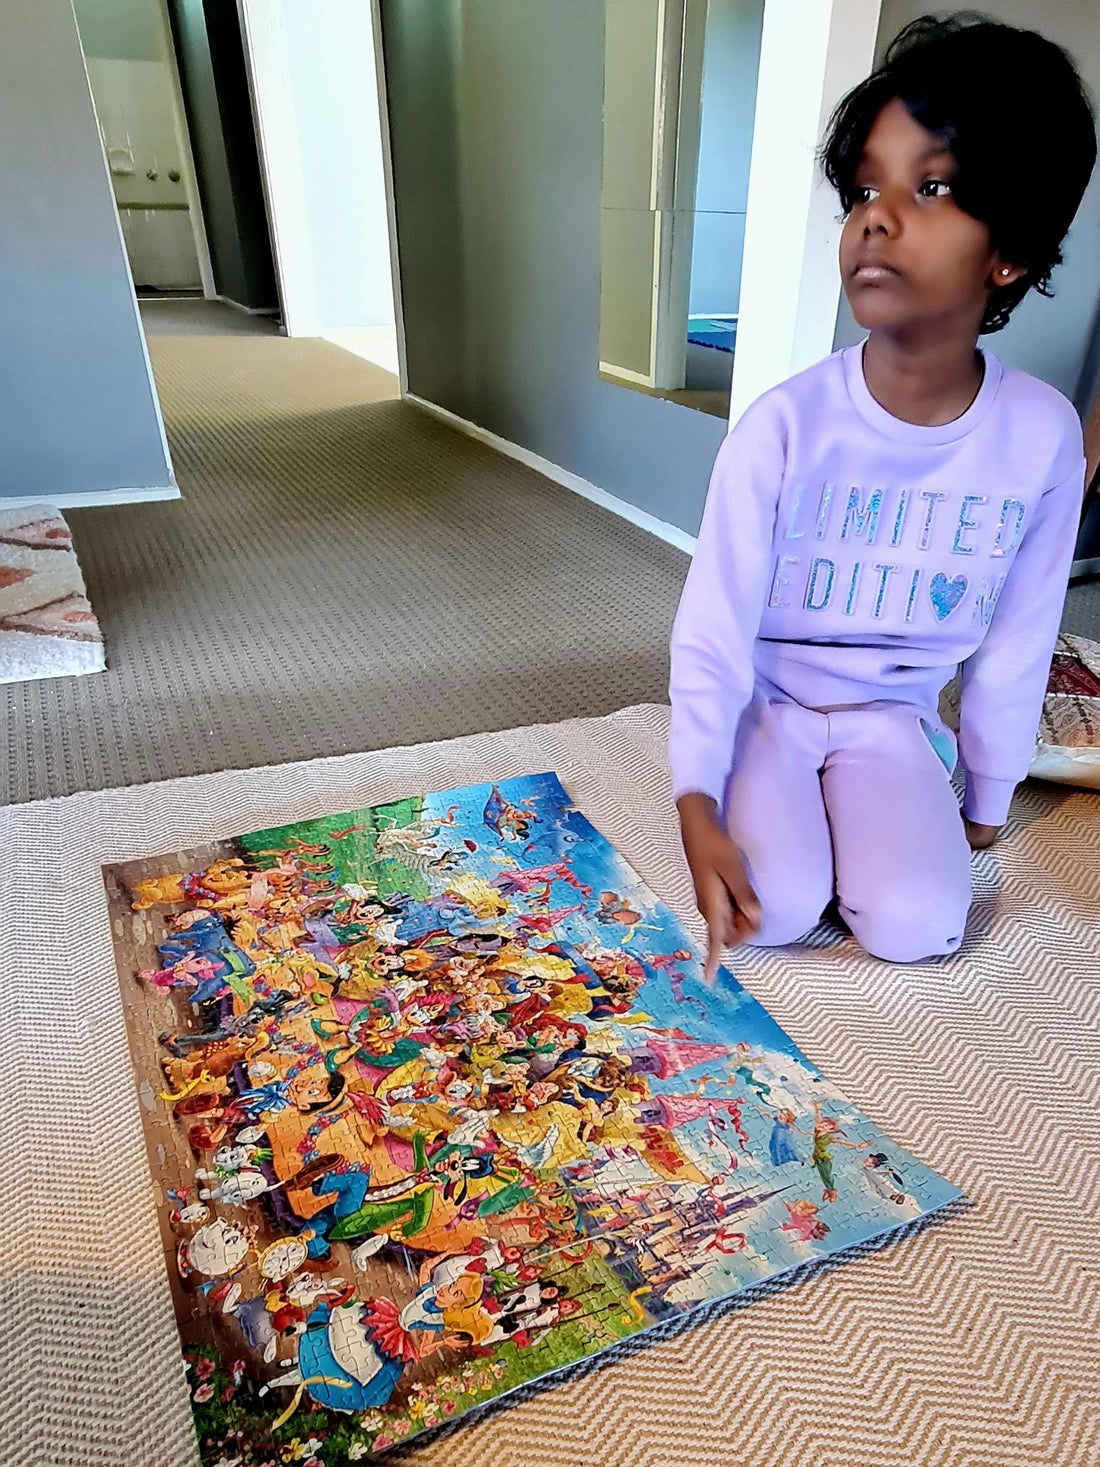 Jigsaw puzzles of 500 and 1,000 pieces put together without a picture